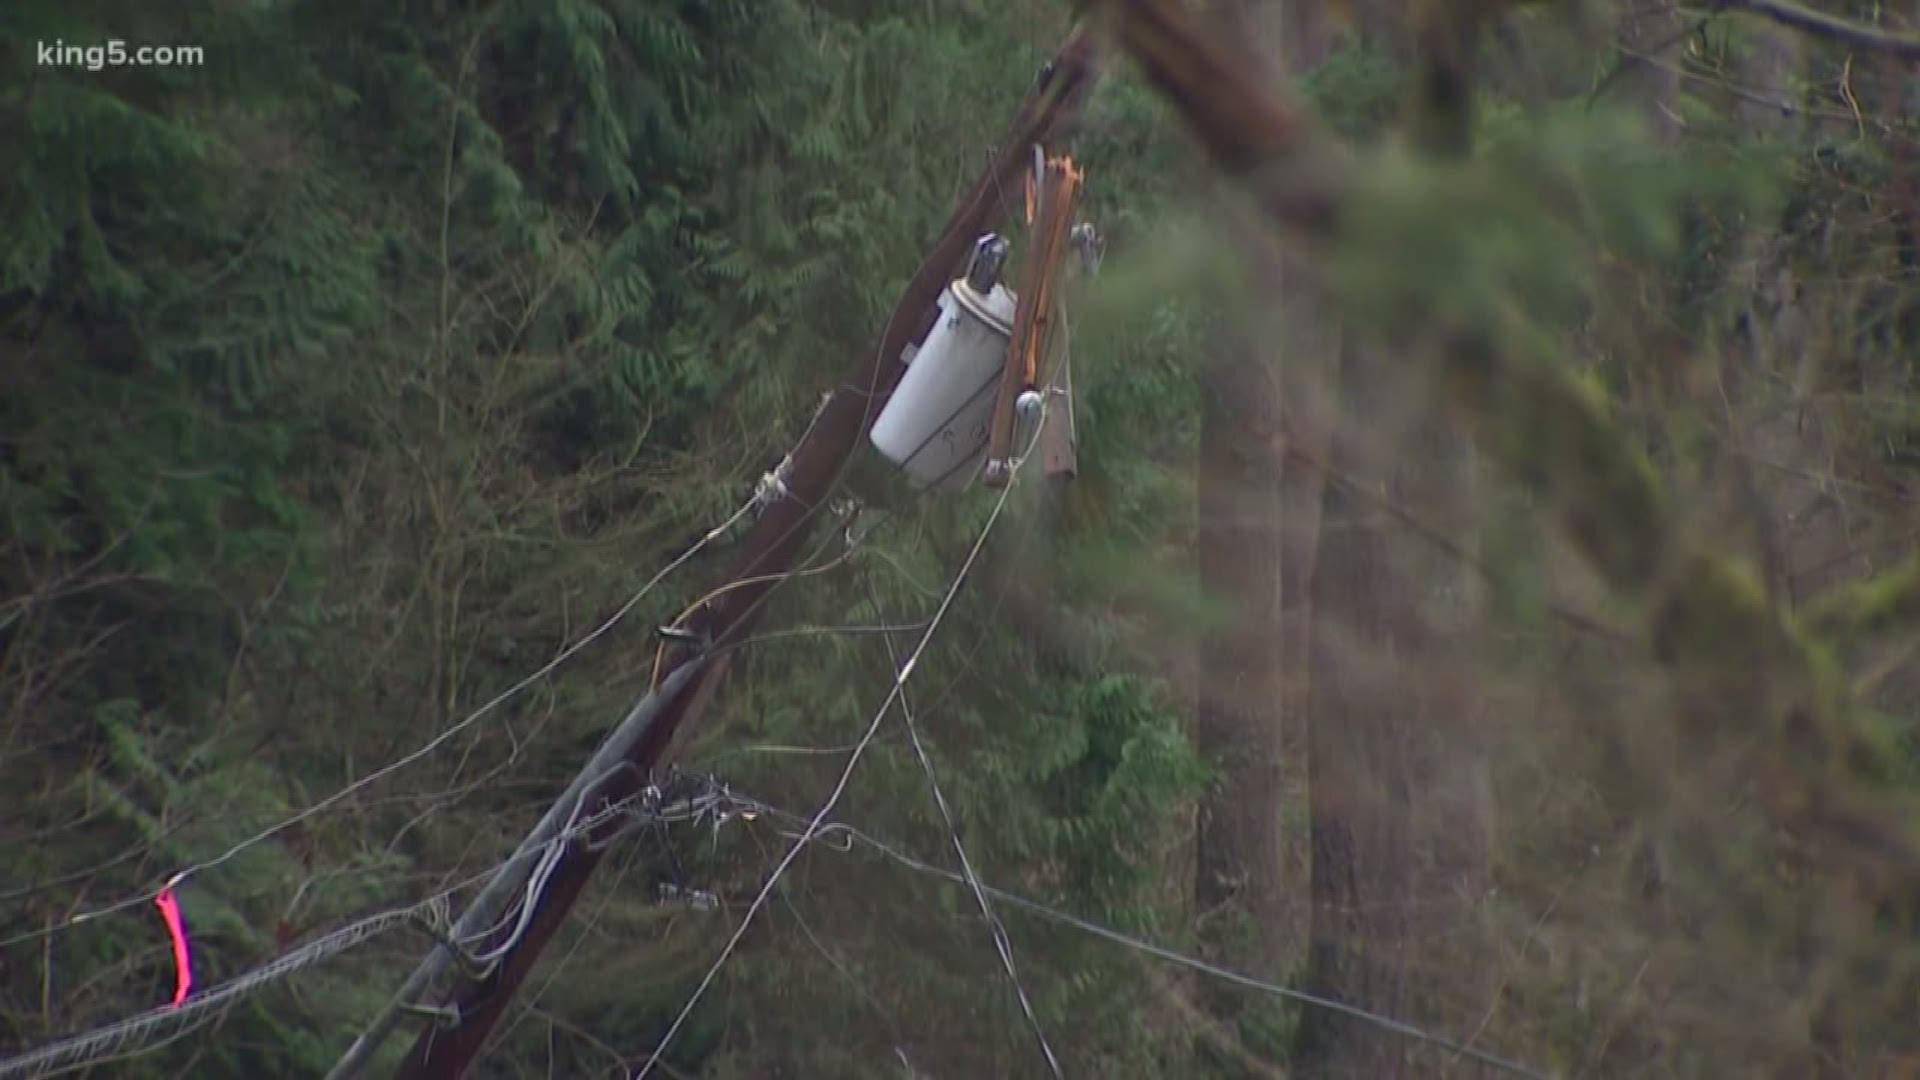 Thousands of people around Western Washington are still in the dark after Sunday's windstorm. Now, there's more trouble on the way. A wind advisory is in effect until 6 tomorrow night around the Cascade foothills. KING 5's Michael Crowe shows us what many without power are doing to get by.